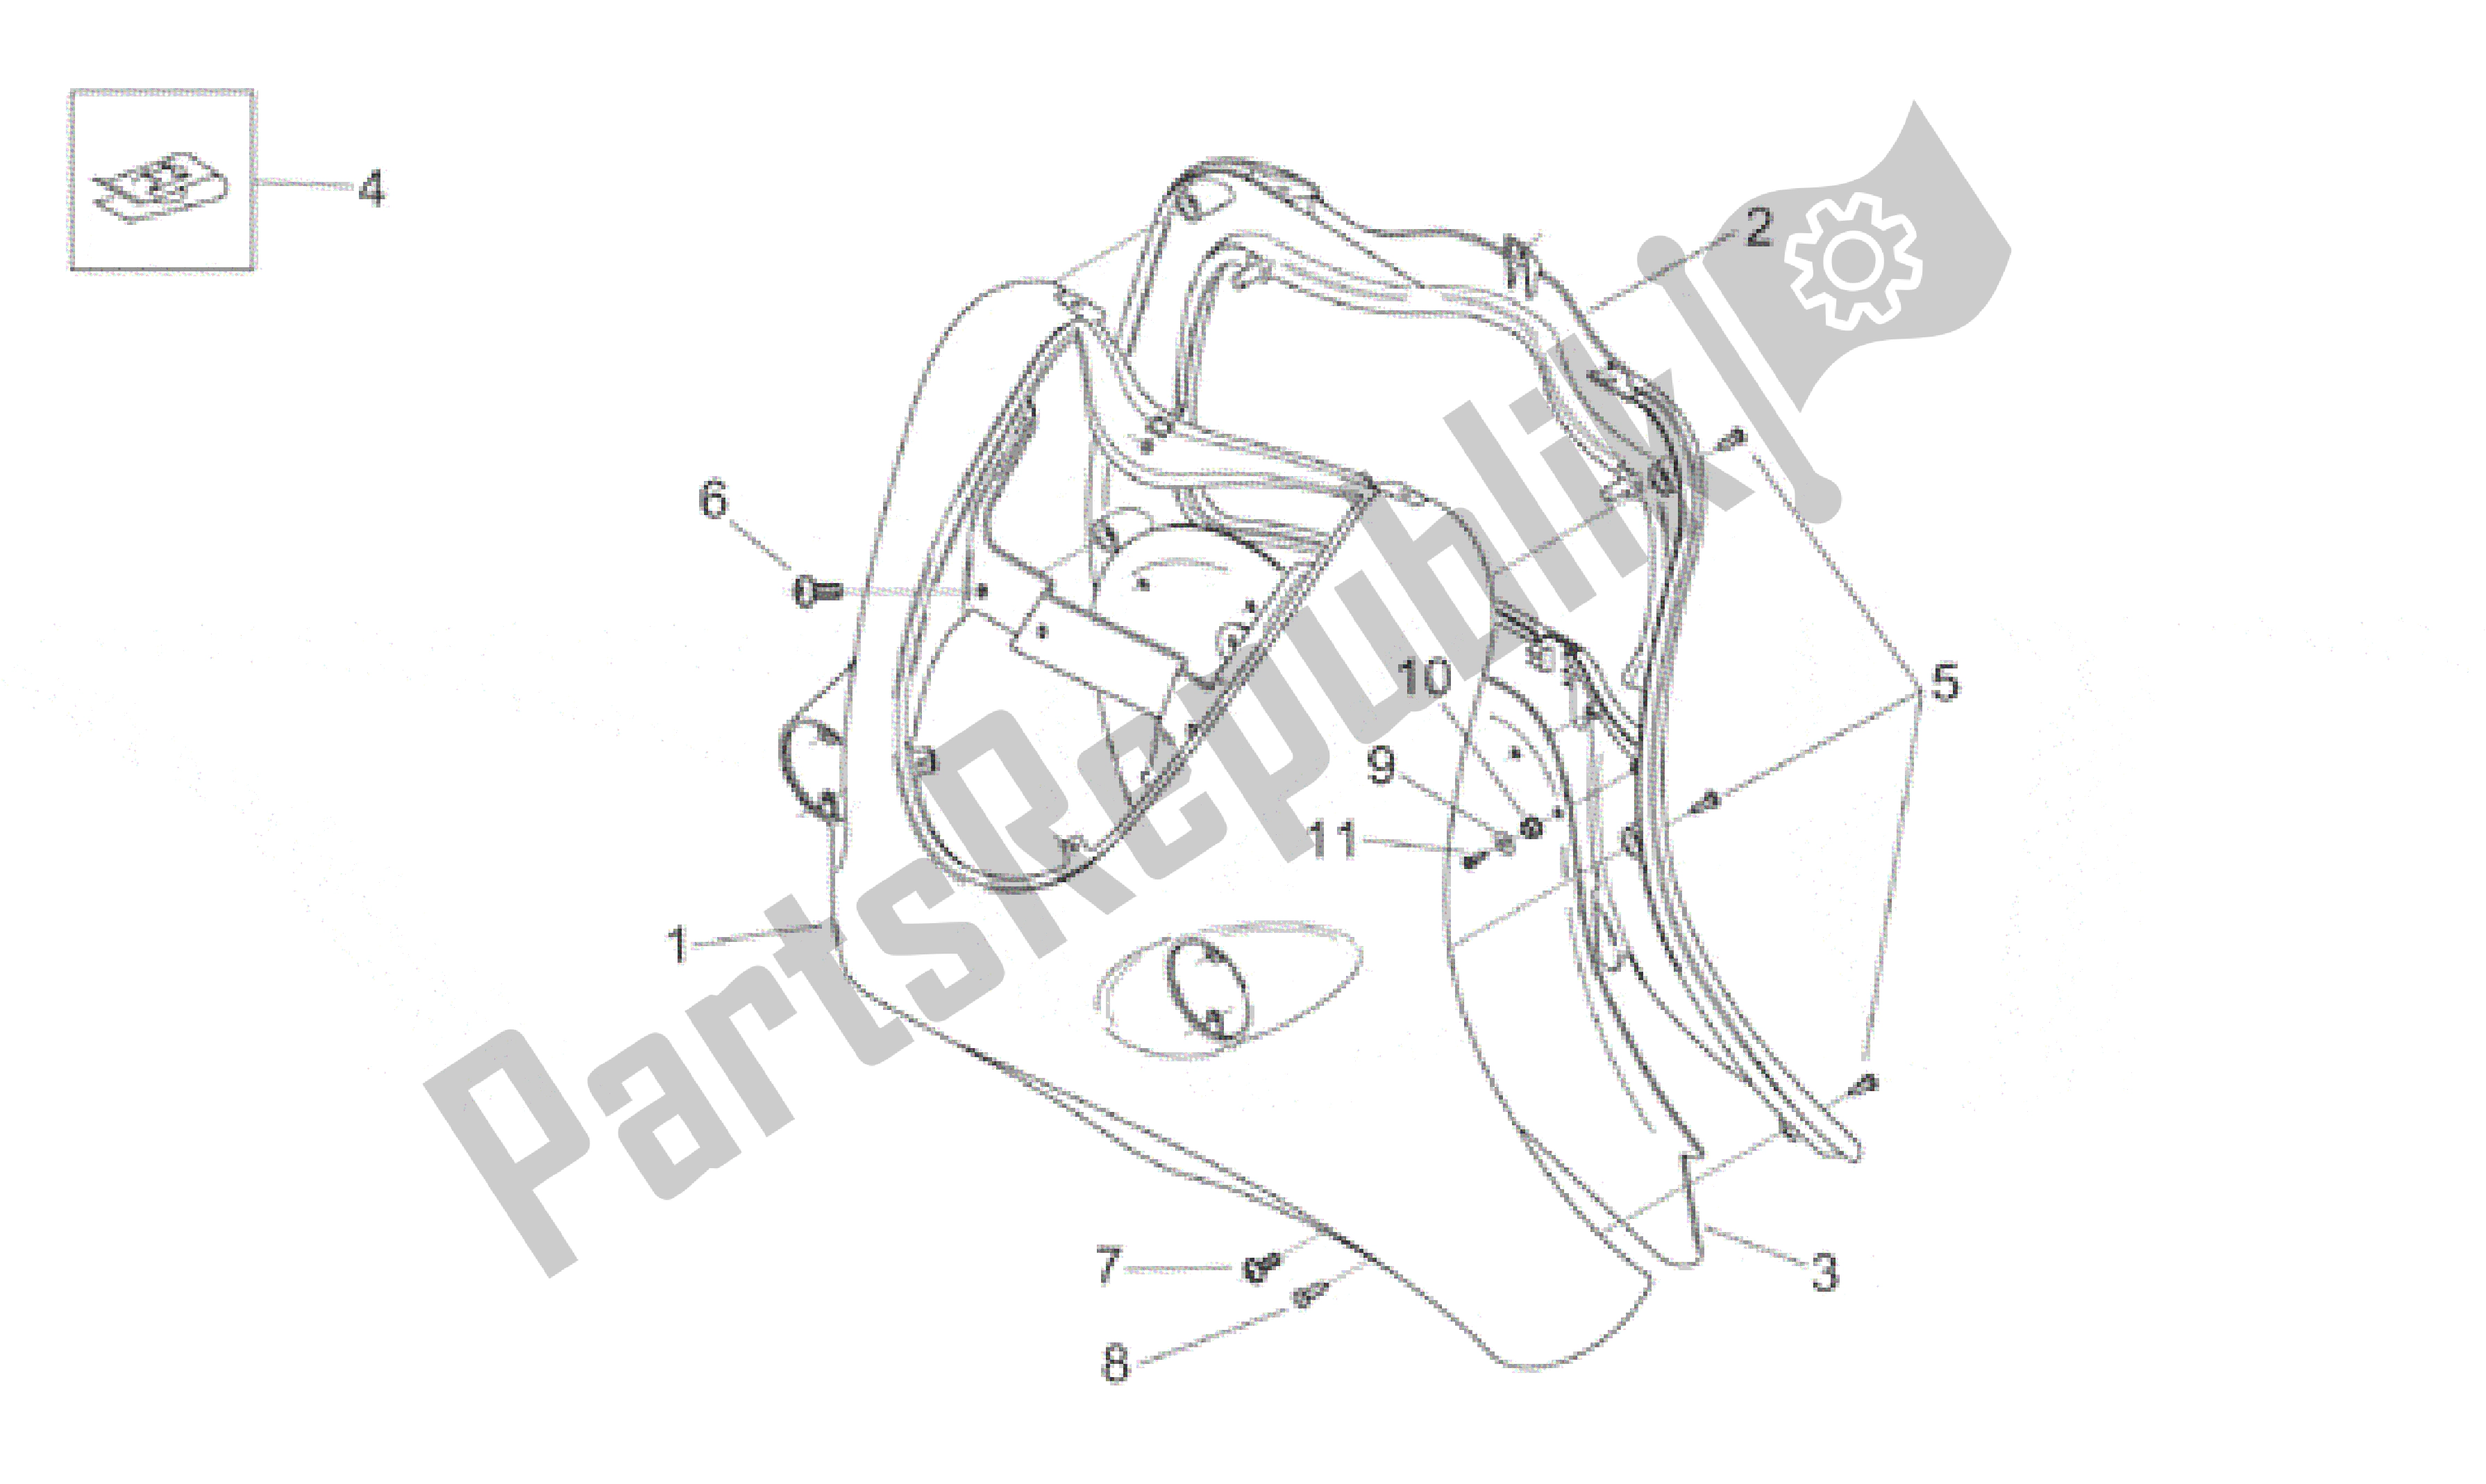 All parts for the Front Body - Shield of the Aprilia Habana 125 1999 - 2001